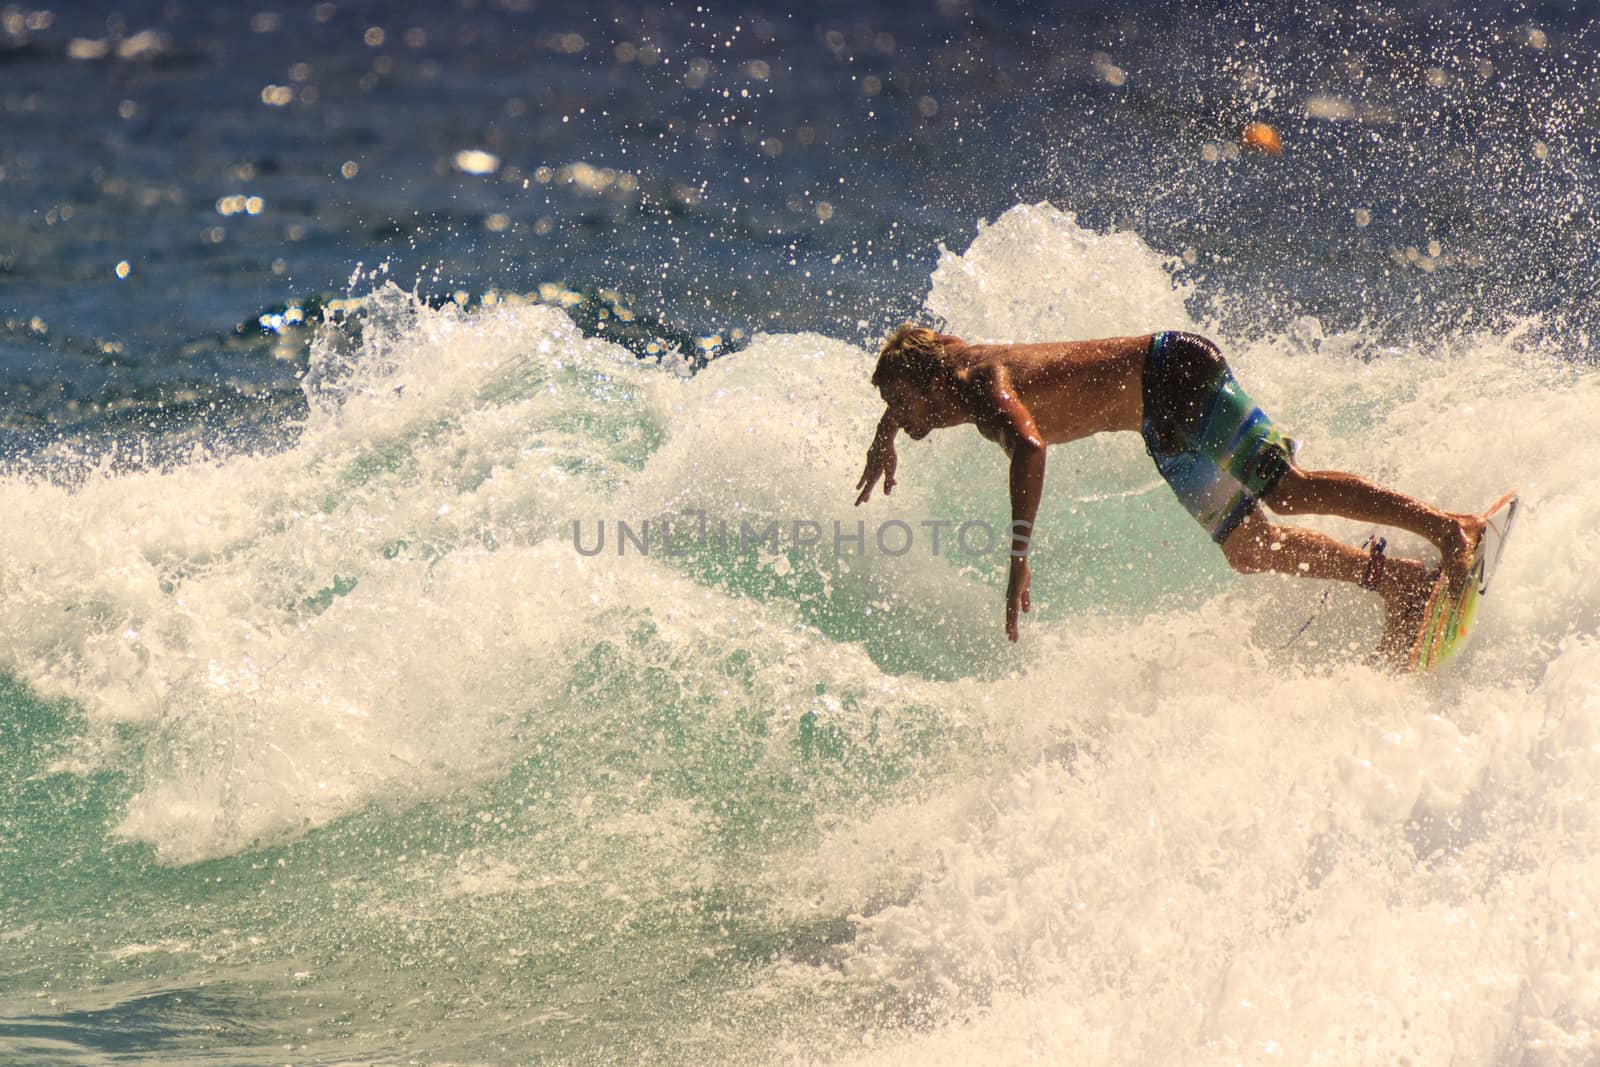 Surfing in Australia by Imagecom